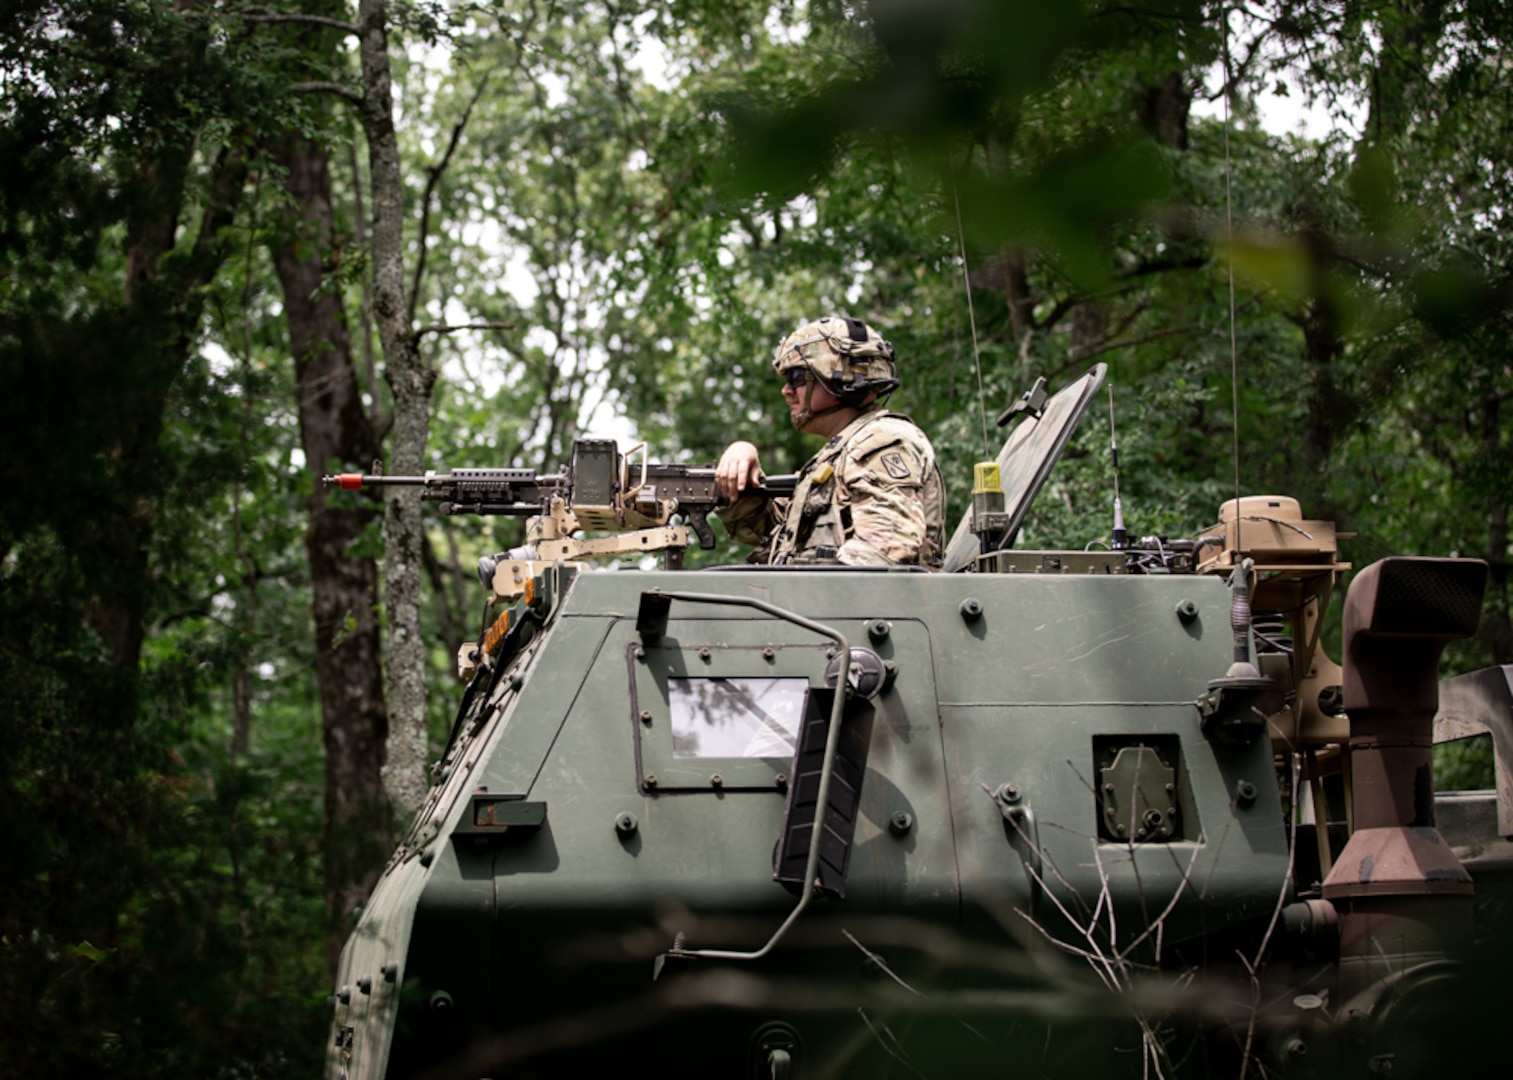 An Oklahoma Army National Guard Soldier with the 45th Field Artillery Brigade, provides security from the turret of a High Mobility Artillery Rocket System during exercise Western Strike at Fort Chaffee, Arkansas, June 21, 2023. Western Strike is a highly immersive and fully instrumented training comparable to a combat training center that aims to prepare units like the 45th FAB for overseas operations. (Oklahoma National Guard photo by Spc. Danielle Rayon)